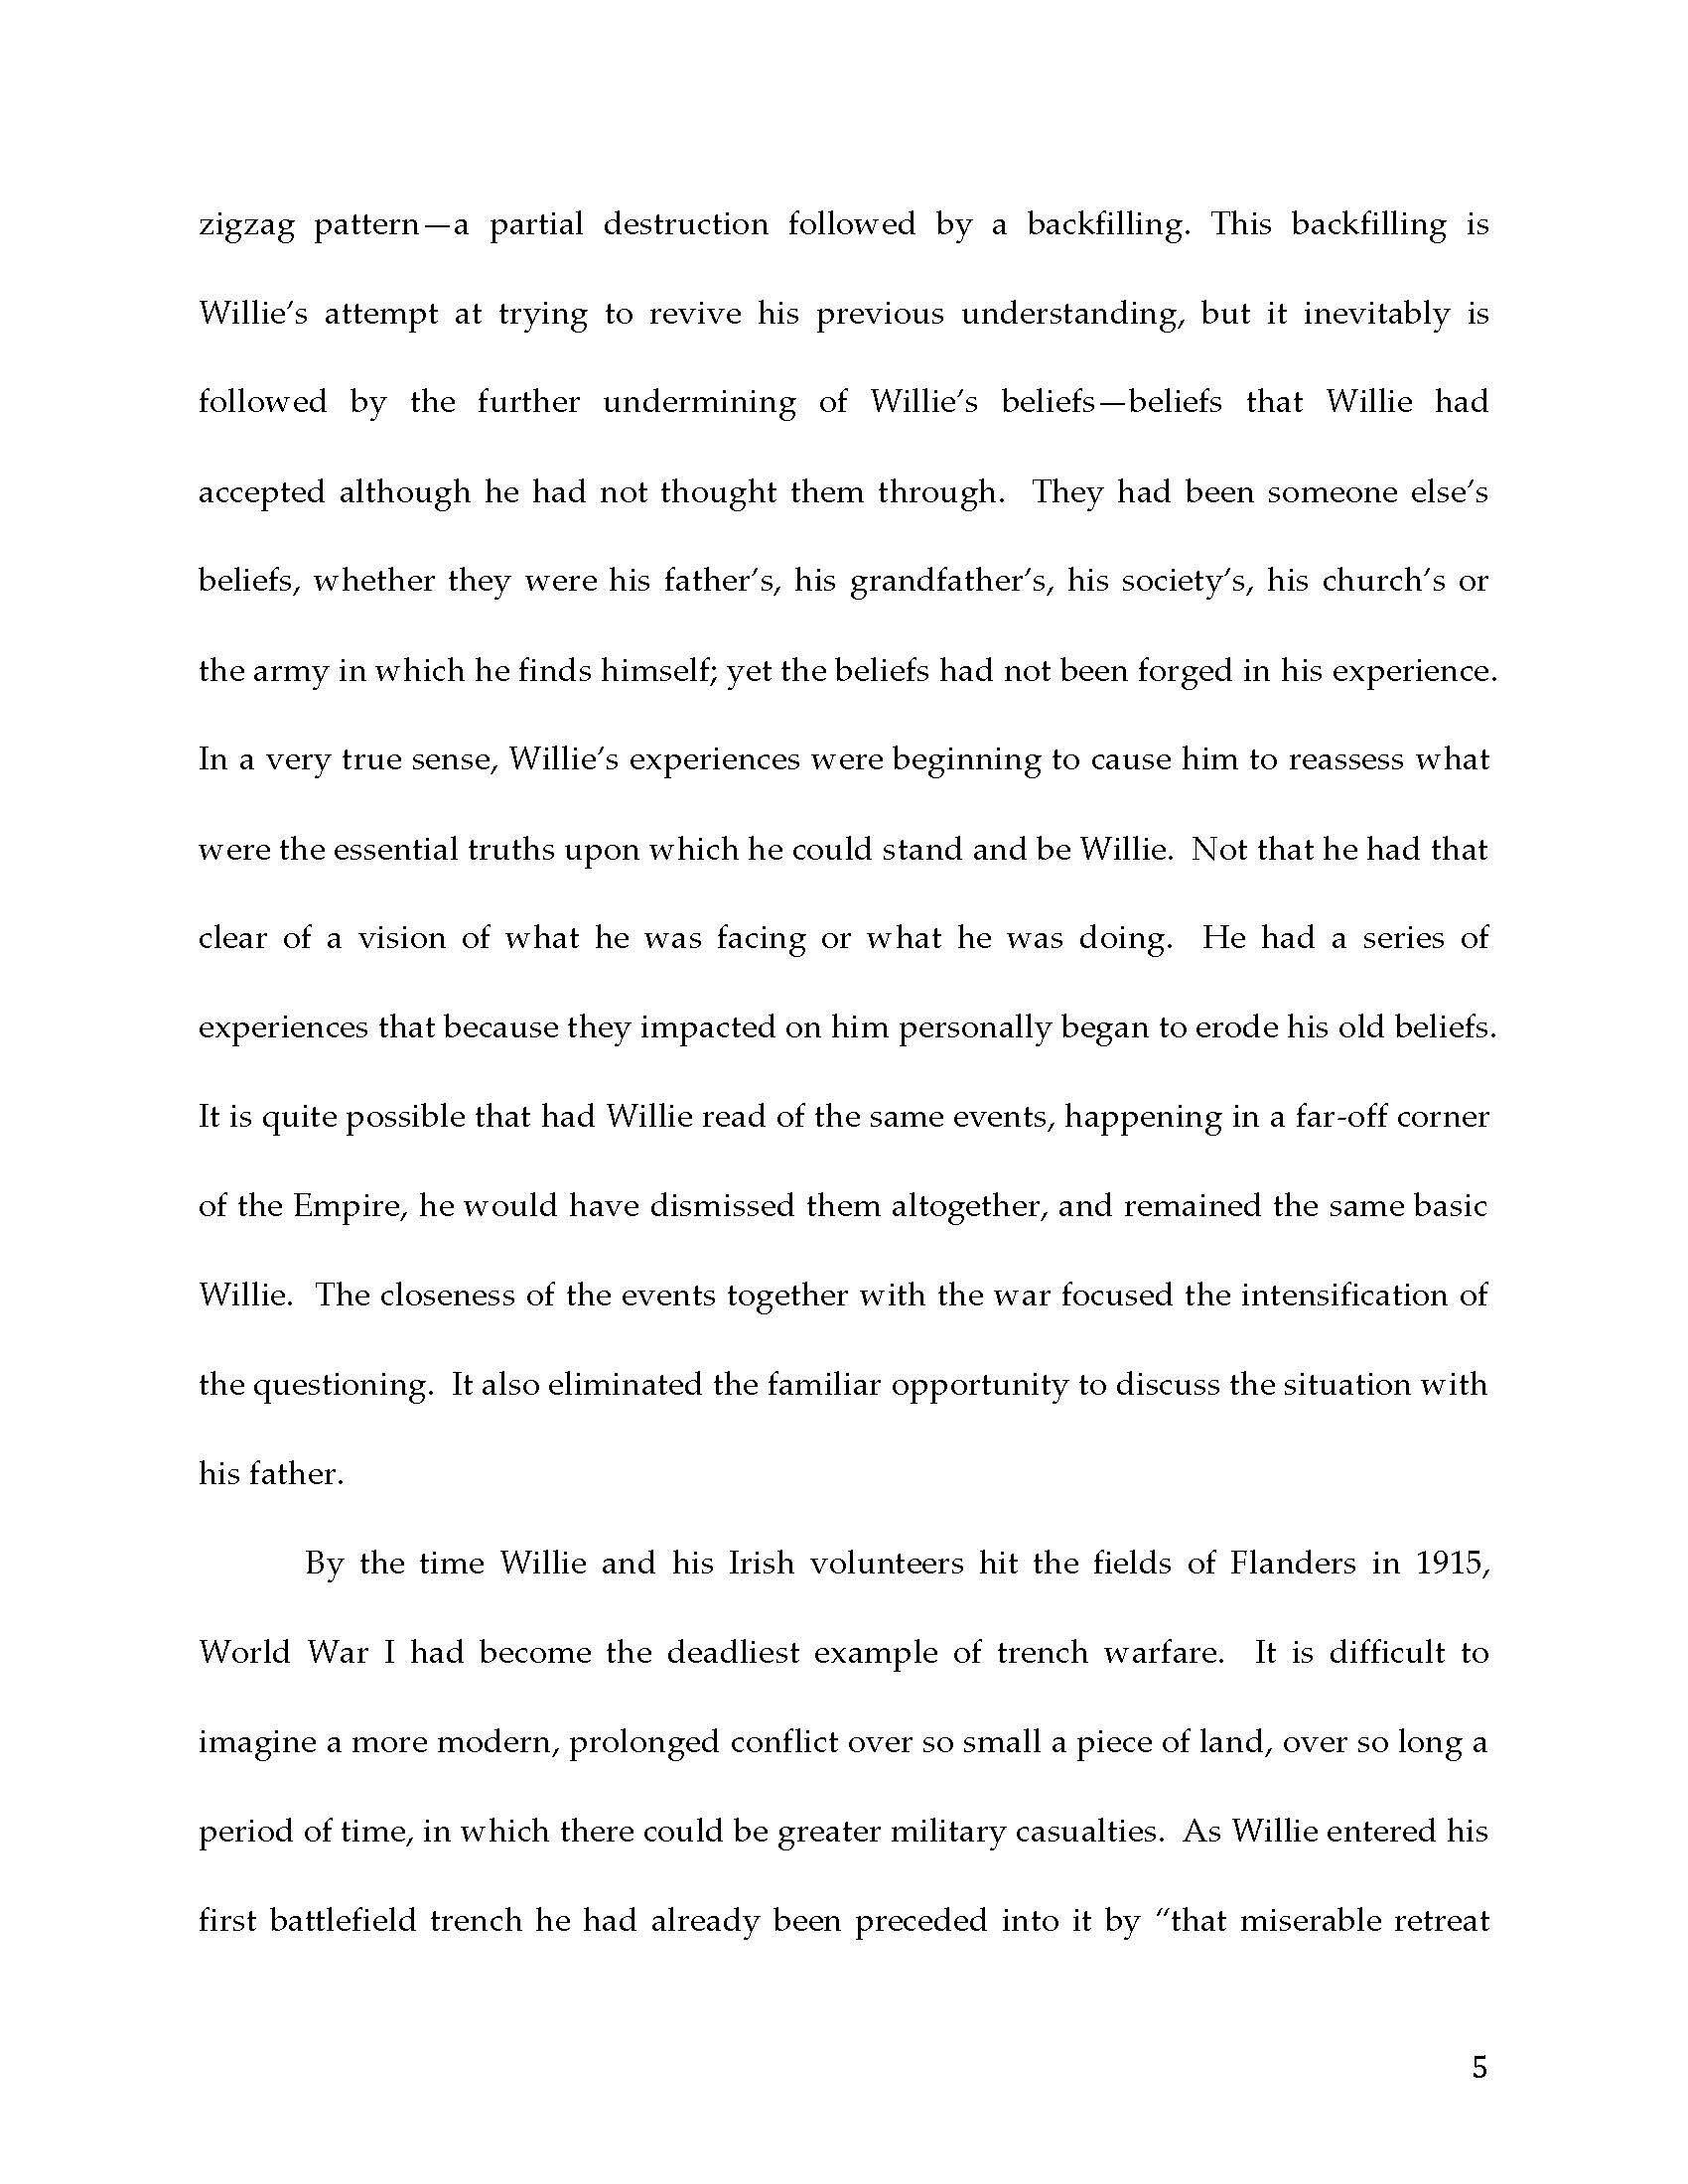 Becoming William Dunne_Paper_NAOMS_Page_05.jpg